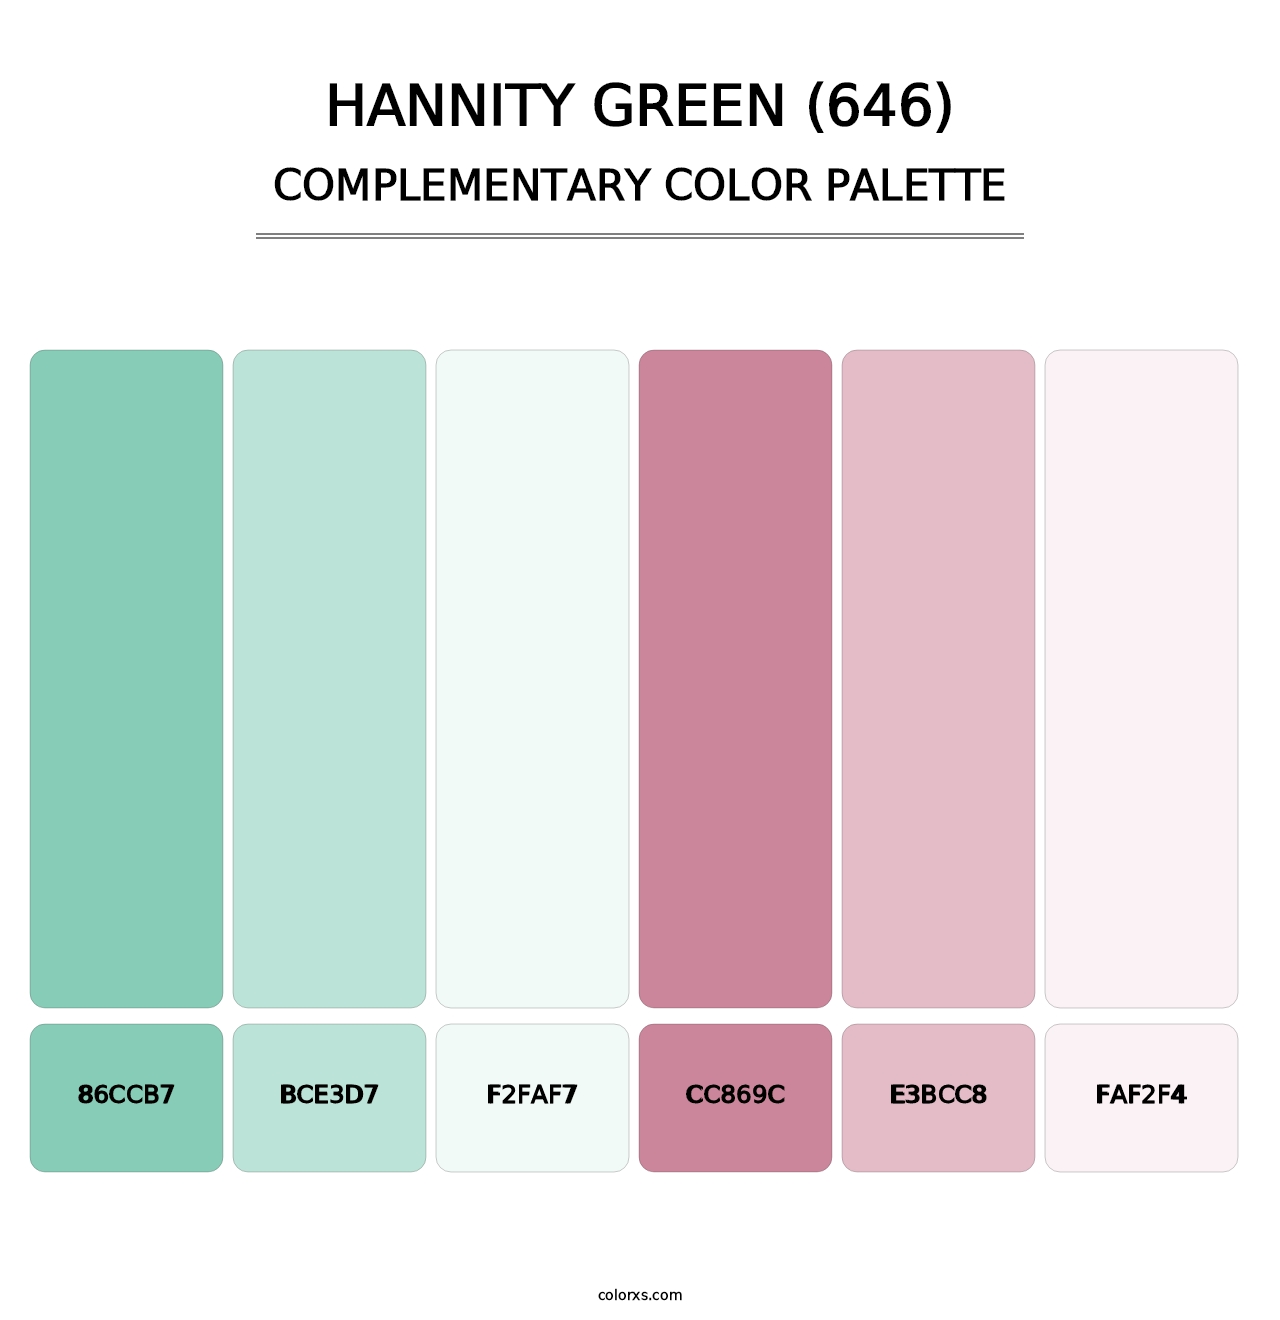 Hannity Green (646) - Complementary Color Palette